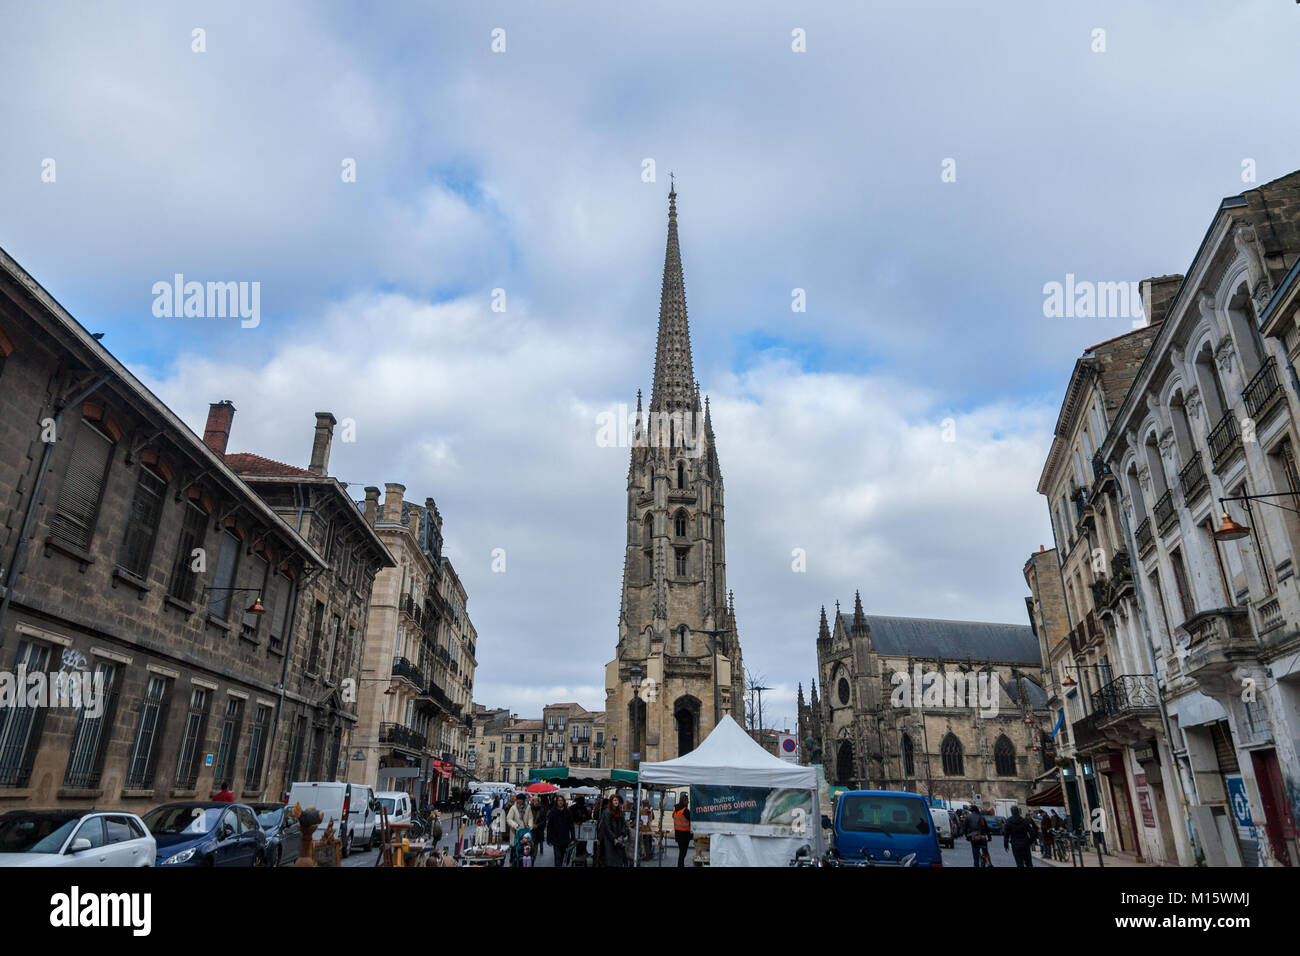 BORDEAUX, FRANCE - DECEMBER 24, 2017: St Michel Basilica (Basilique Saint Michel) with its iconic tower in the city center of Bordeaux. This gothic ch Stock Photo